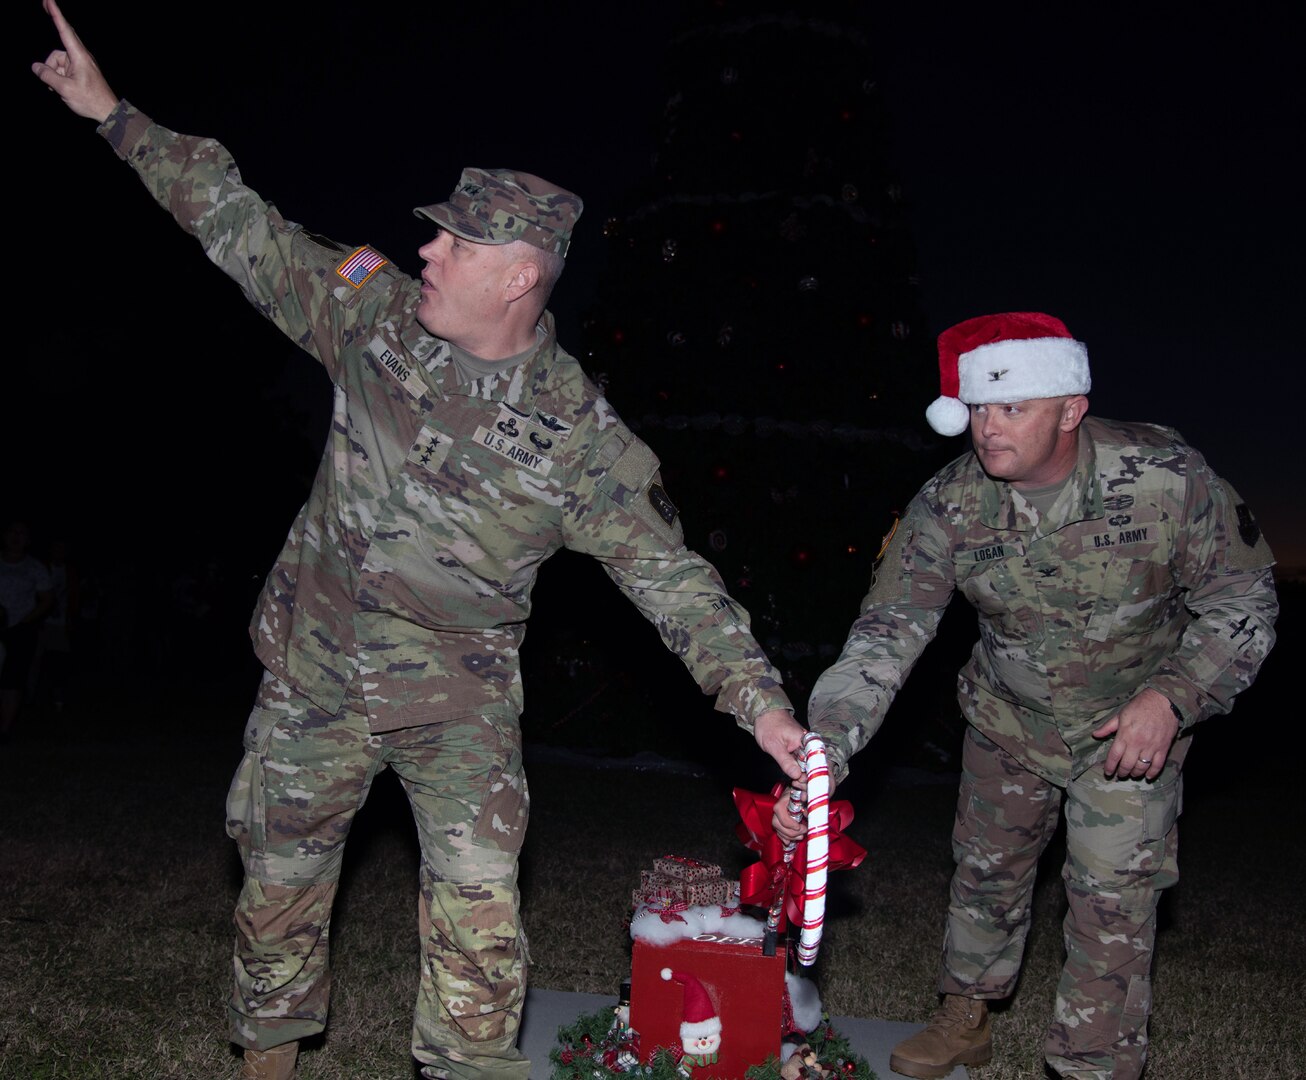 JBSA lights up for the holidays